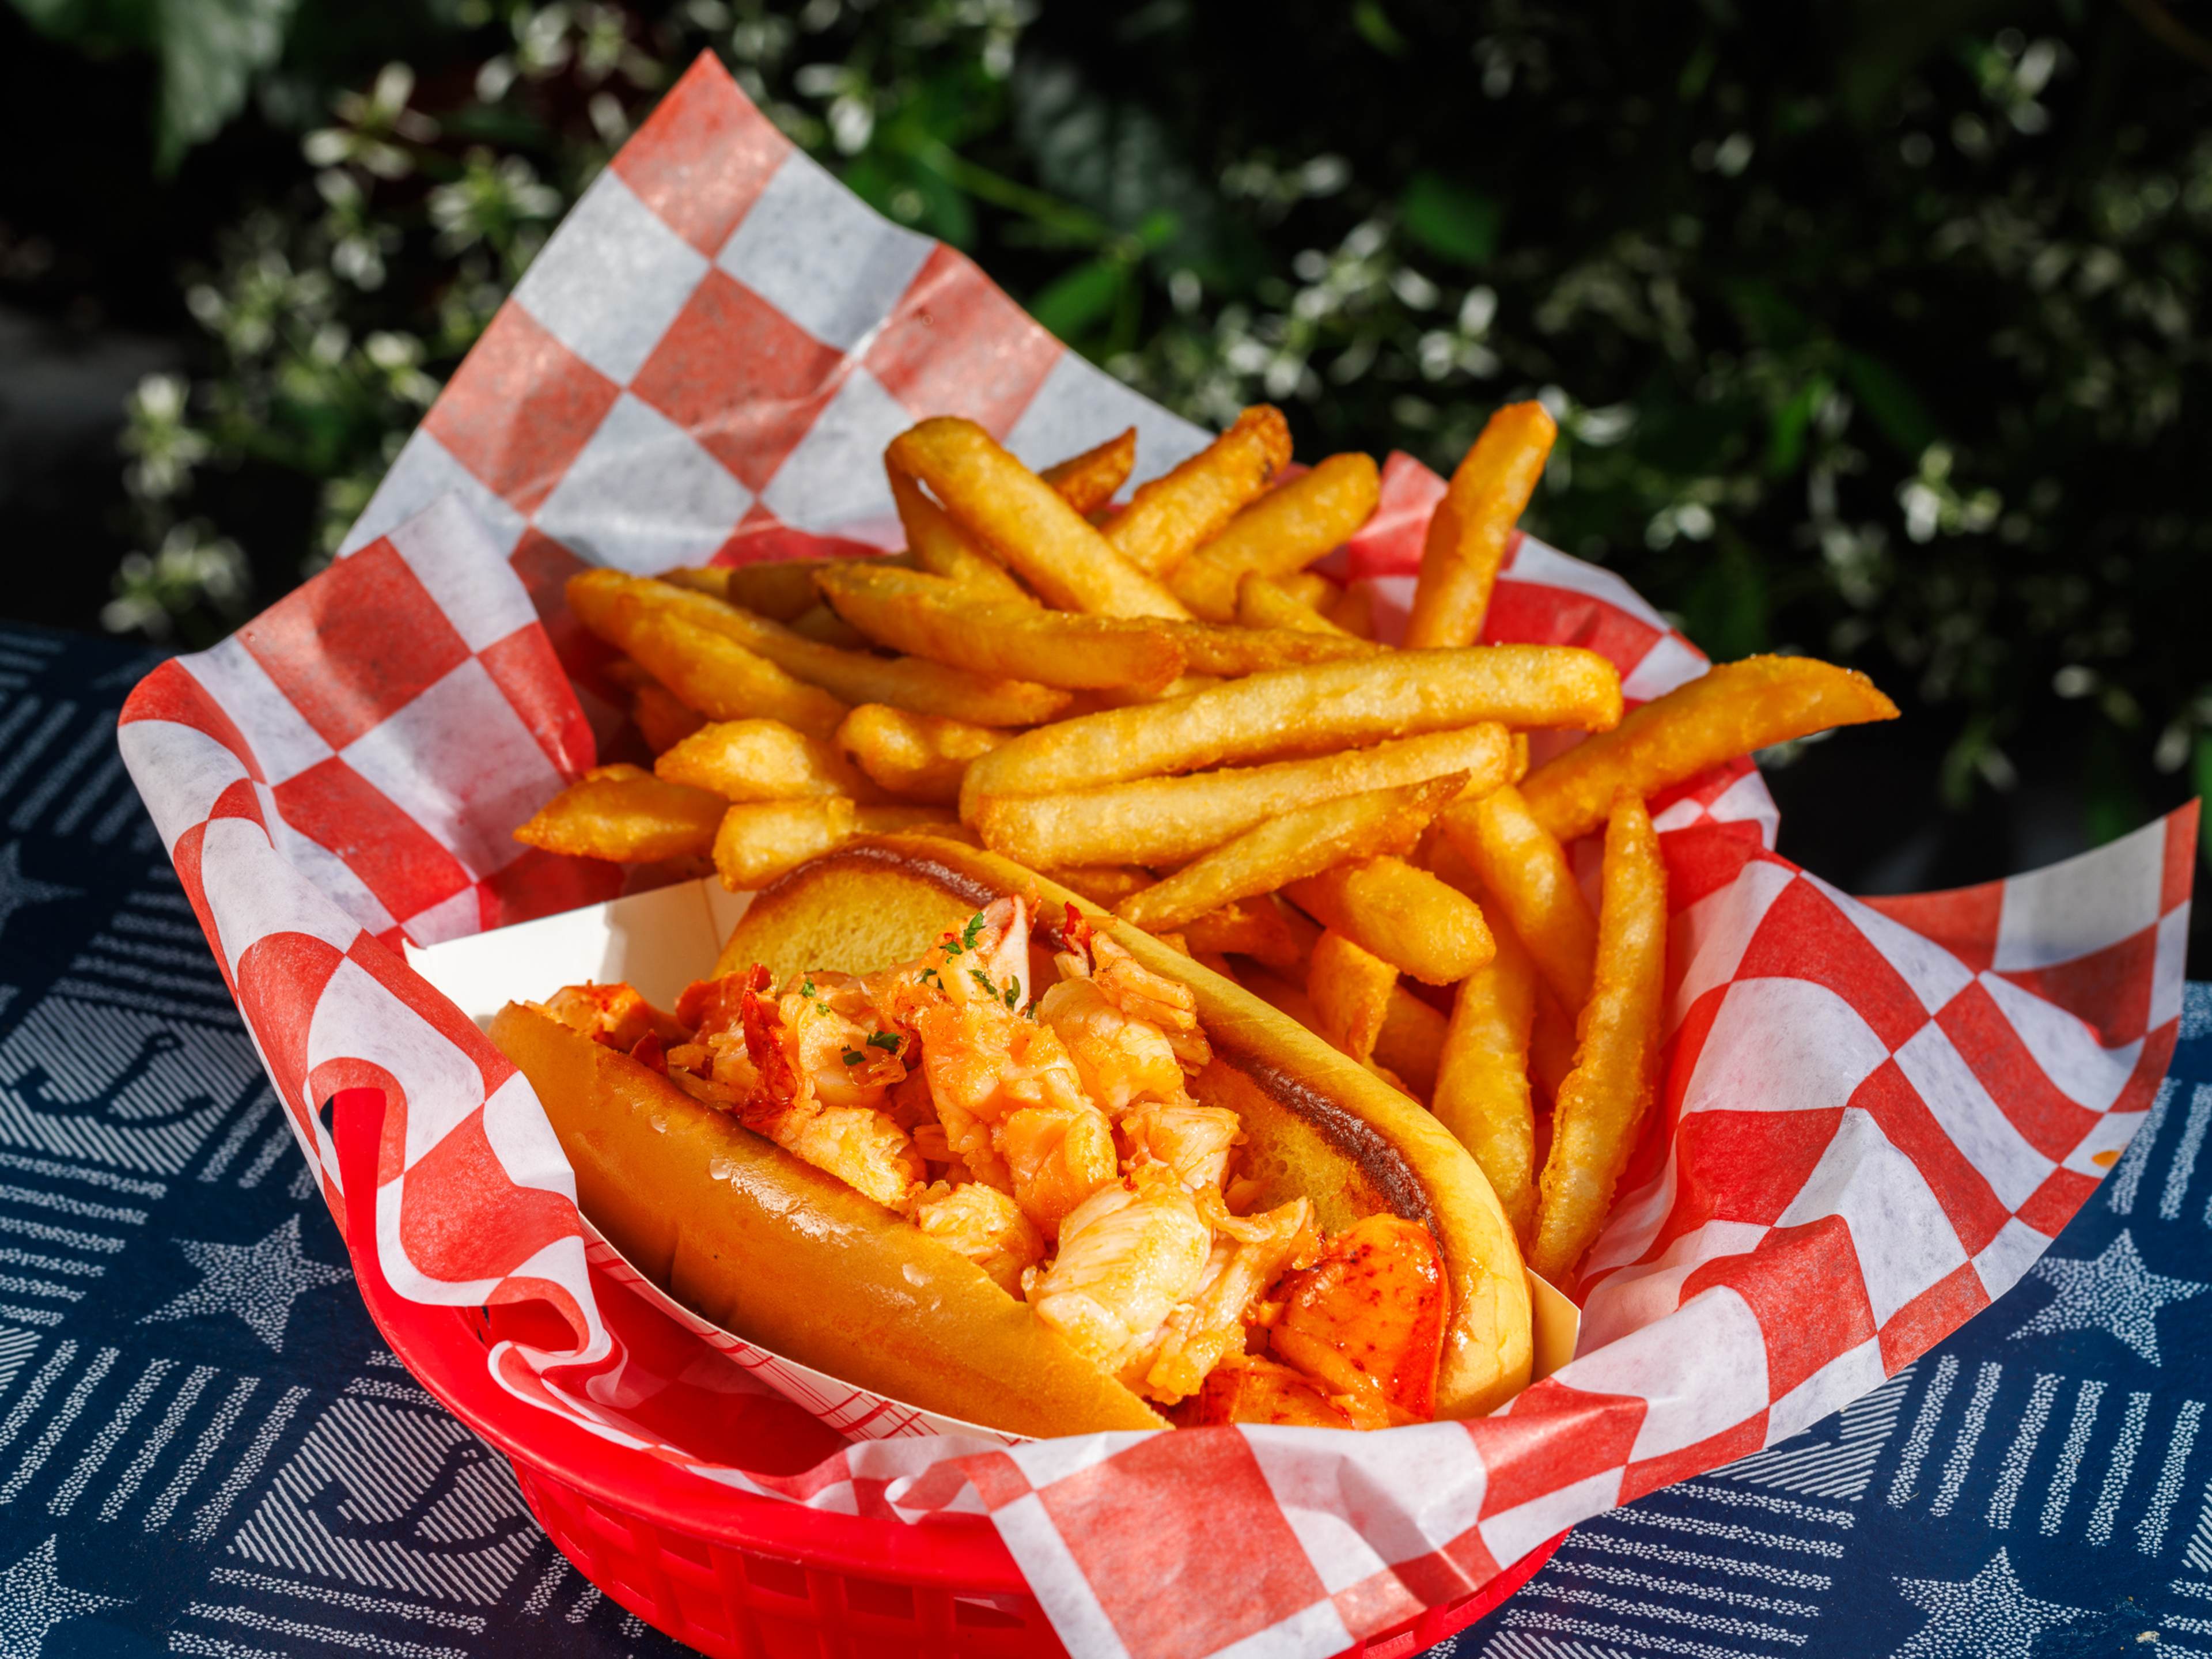 A lobster roll and fries from Bostwicks Chowder House.